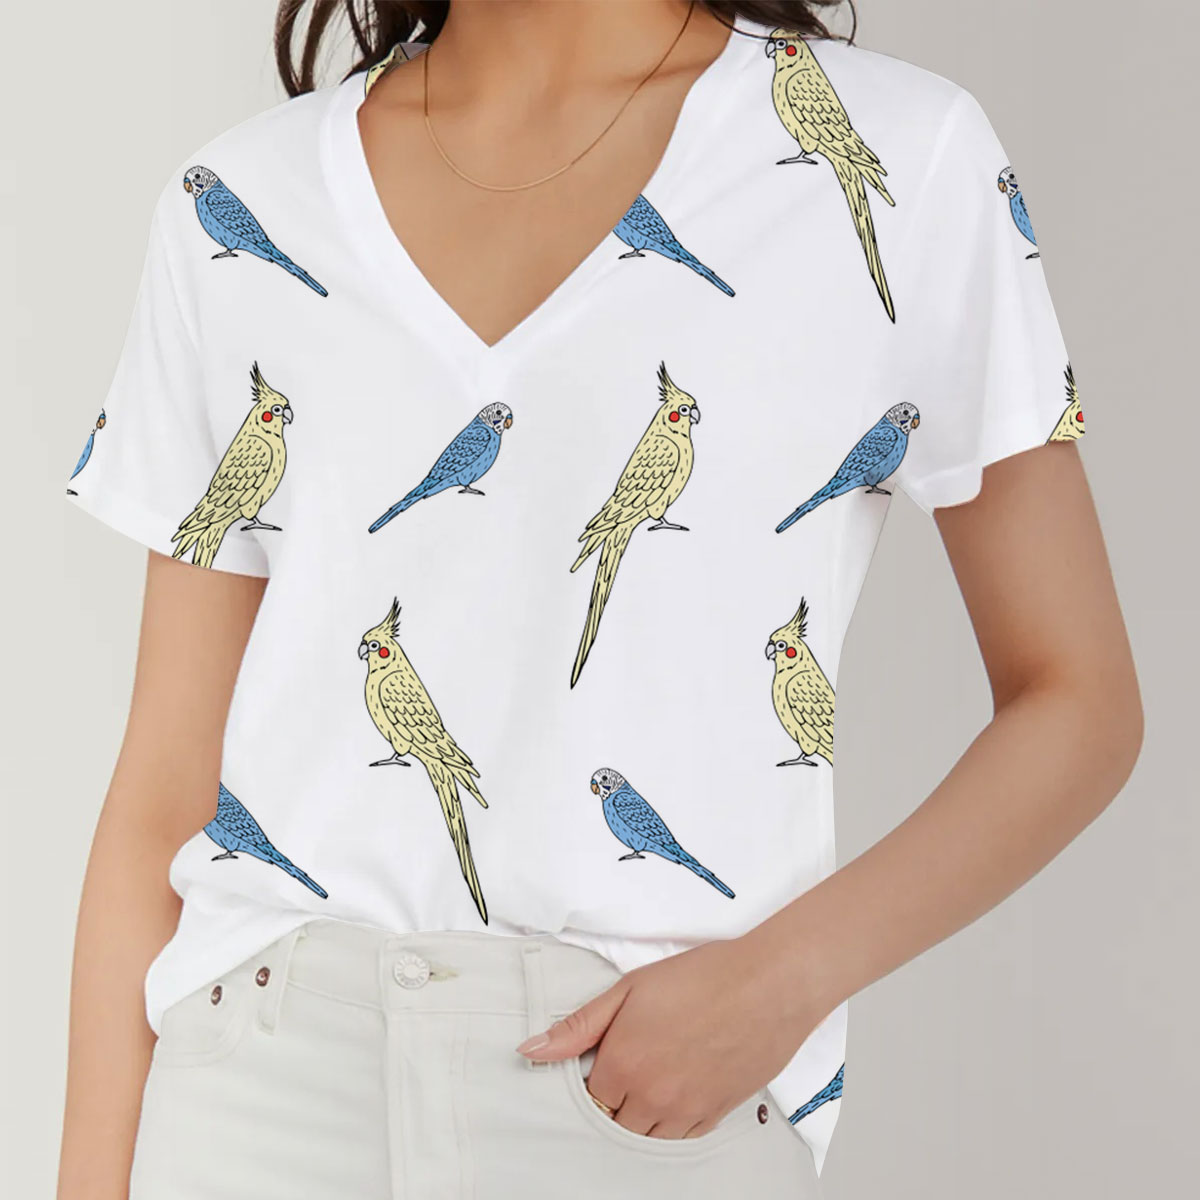 Budgie And Cockatiel V-Neck Women's T-Shirt